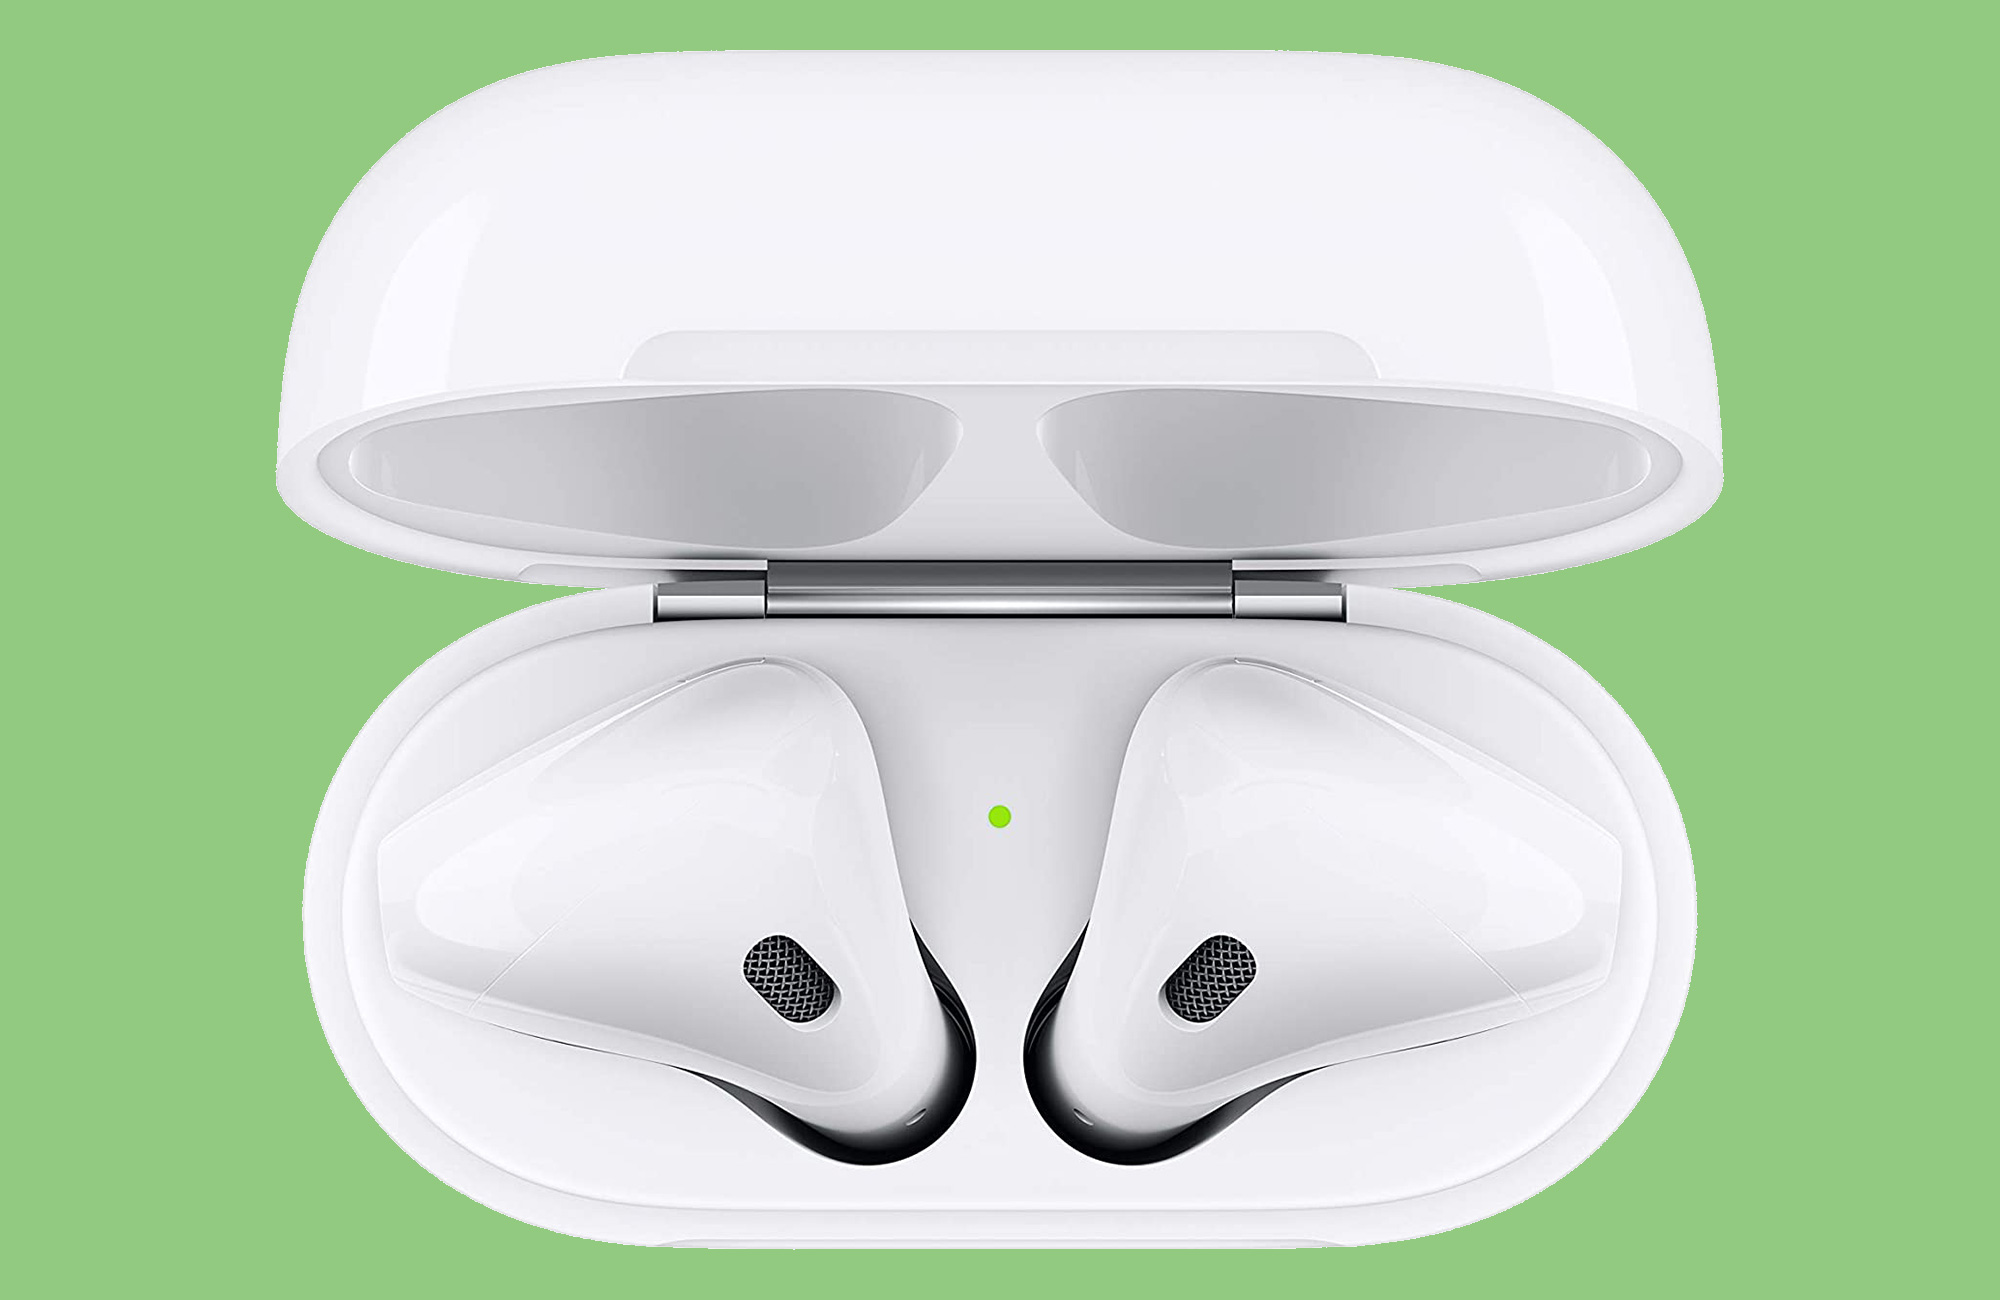 AirPods 2 in their case on a green background